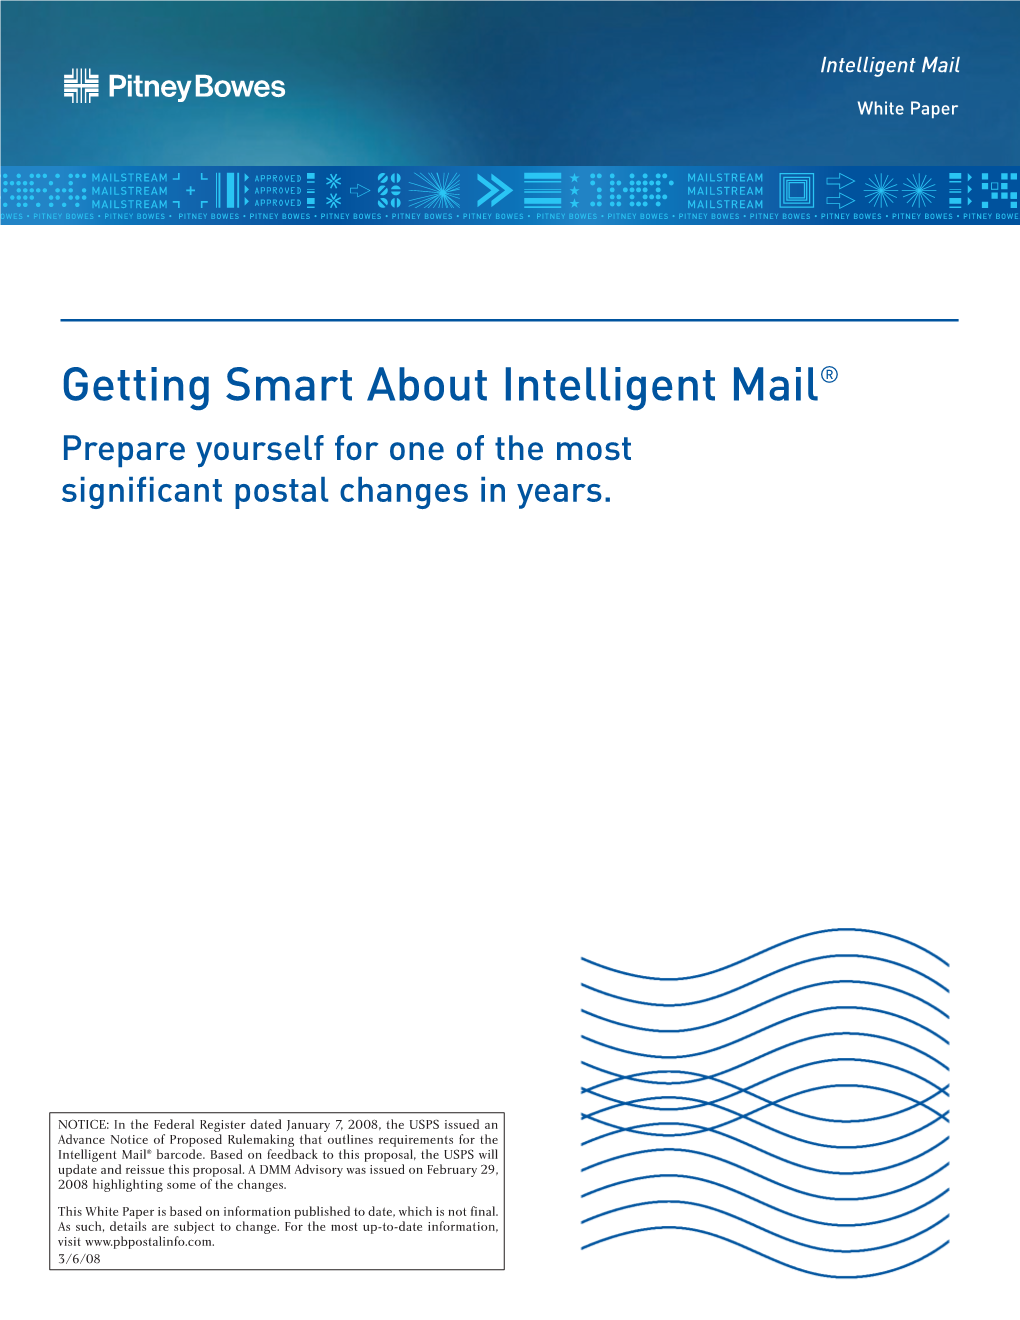 Getting Smart About Intelligent Mail® Prepare Yourself for One of the Most Significant Postal Changes in Years